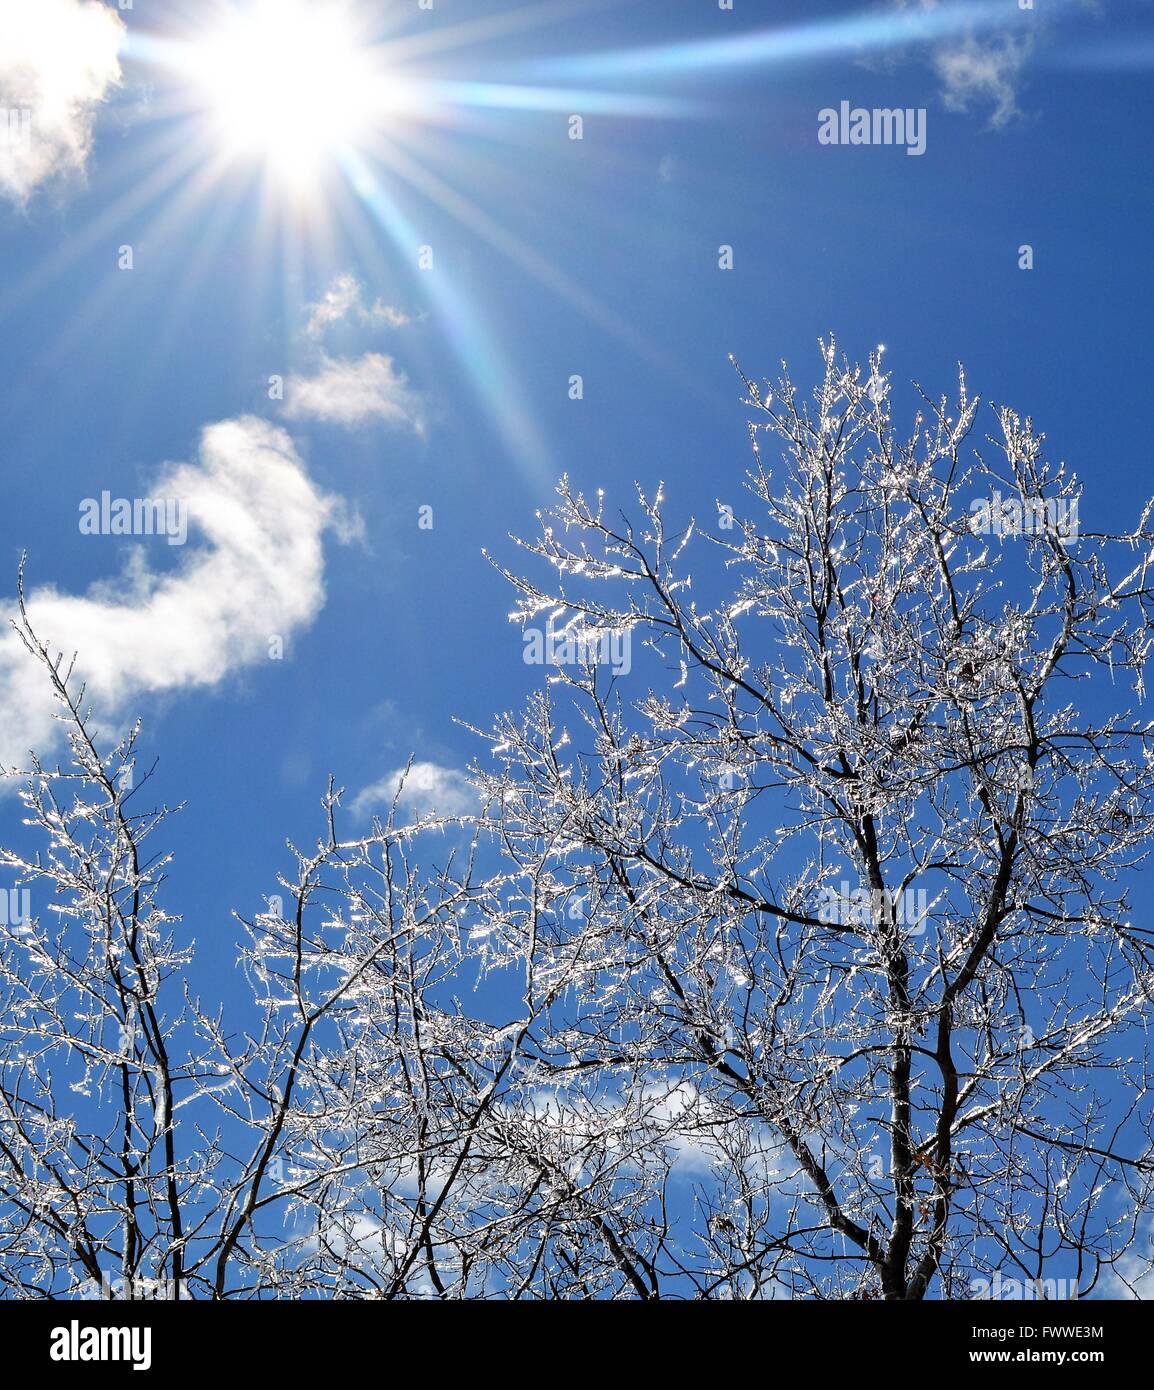 Beautiful photo of the suns rays and the ice crystals reflecting on the trees against a vibrant blue sky Stock Photo